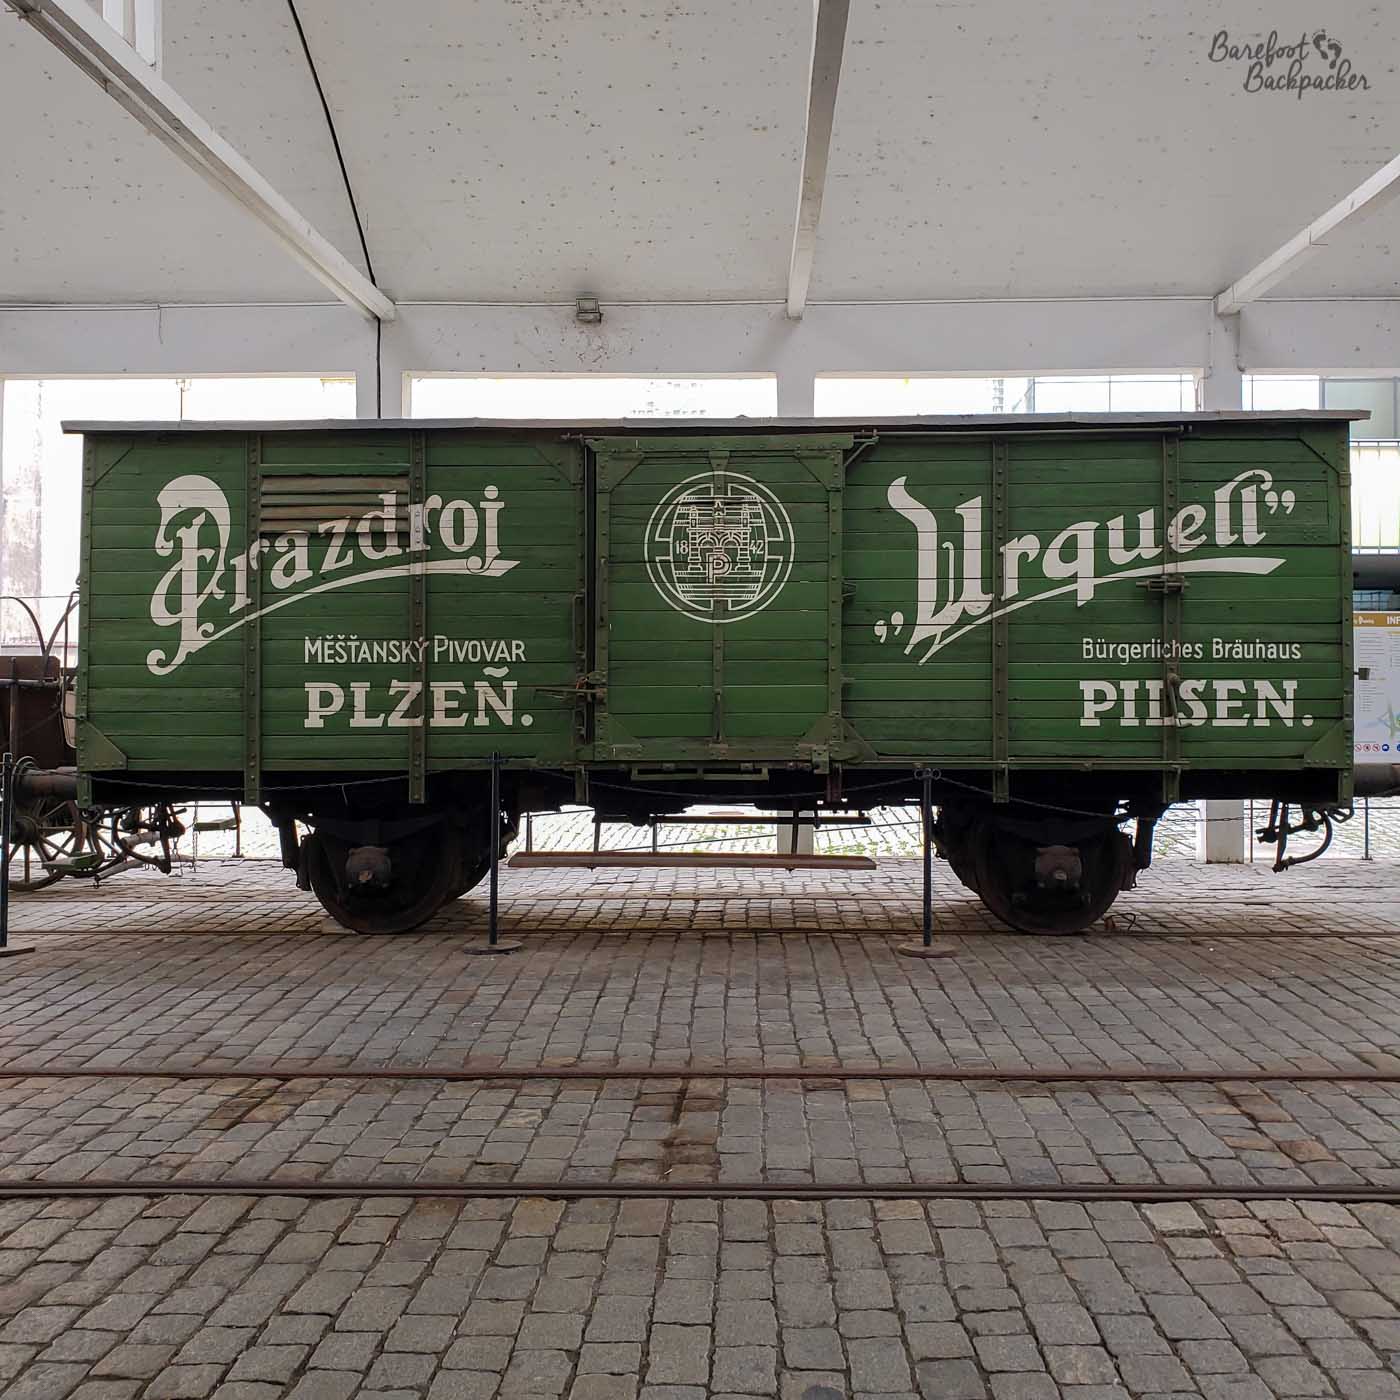 An old rail wagon – rectangular and open-roofed. On the side is an advert for, and logo of, Pilsner Urquell.